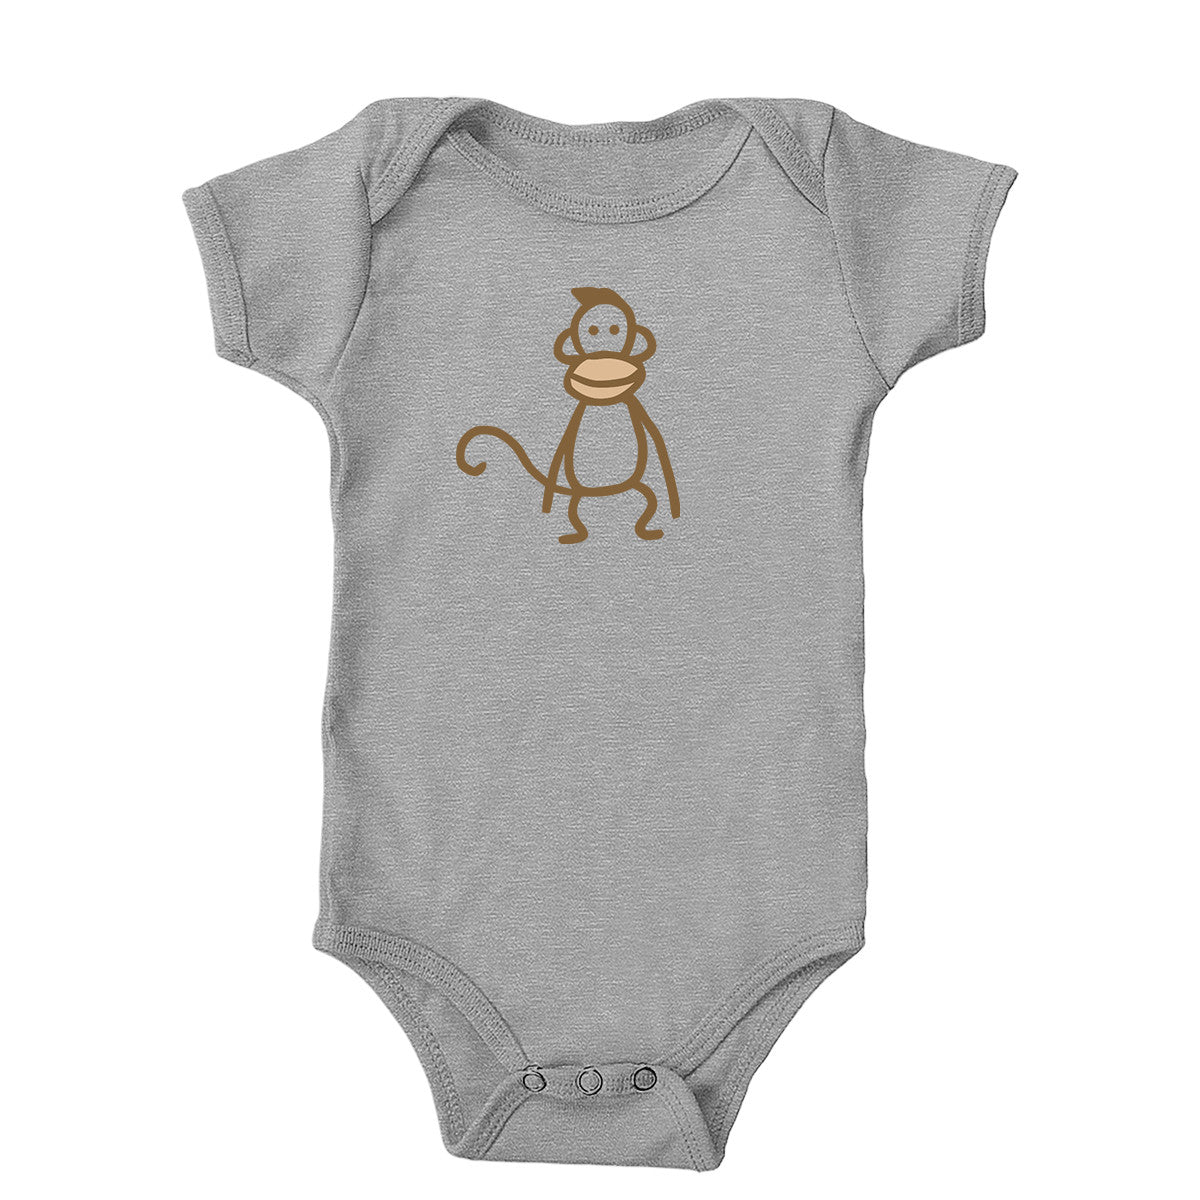 Instant Gratification Monkey Onesie - Wait But Why Store